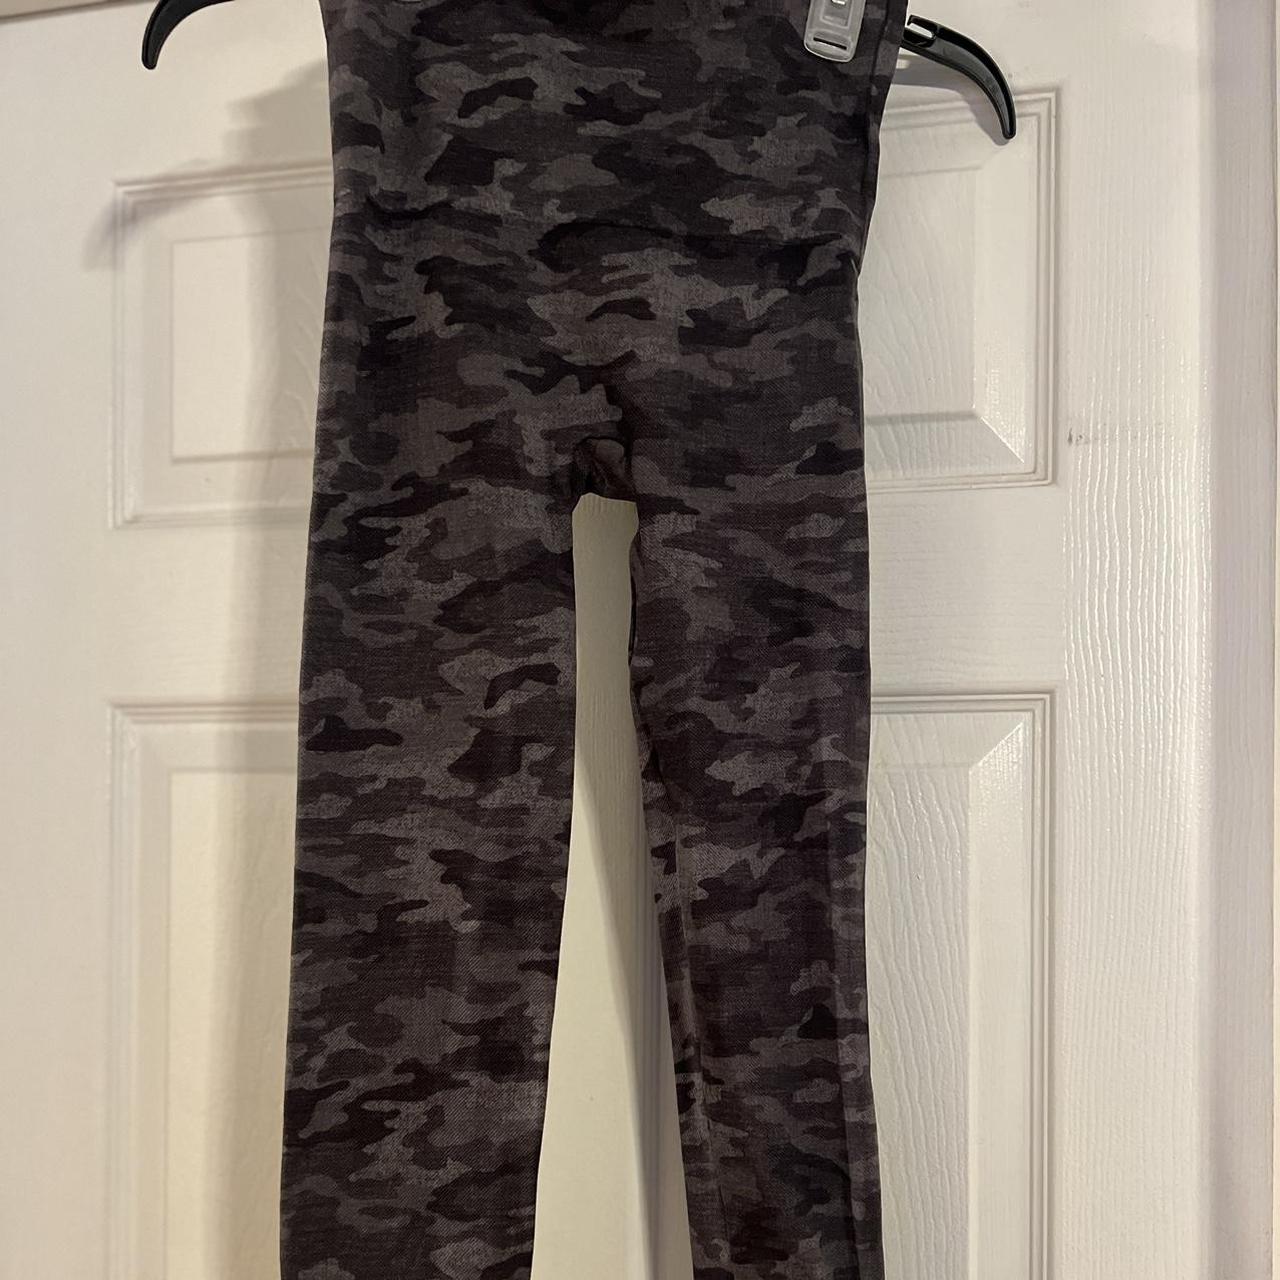 Spanx Camo Leggings Size S/P - can fit a - Depop